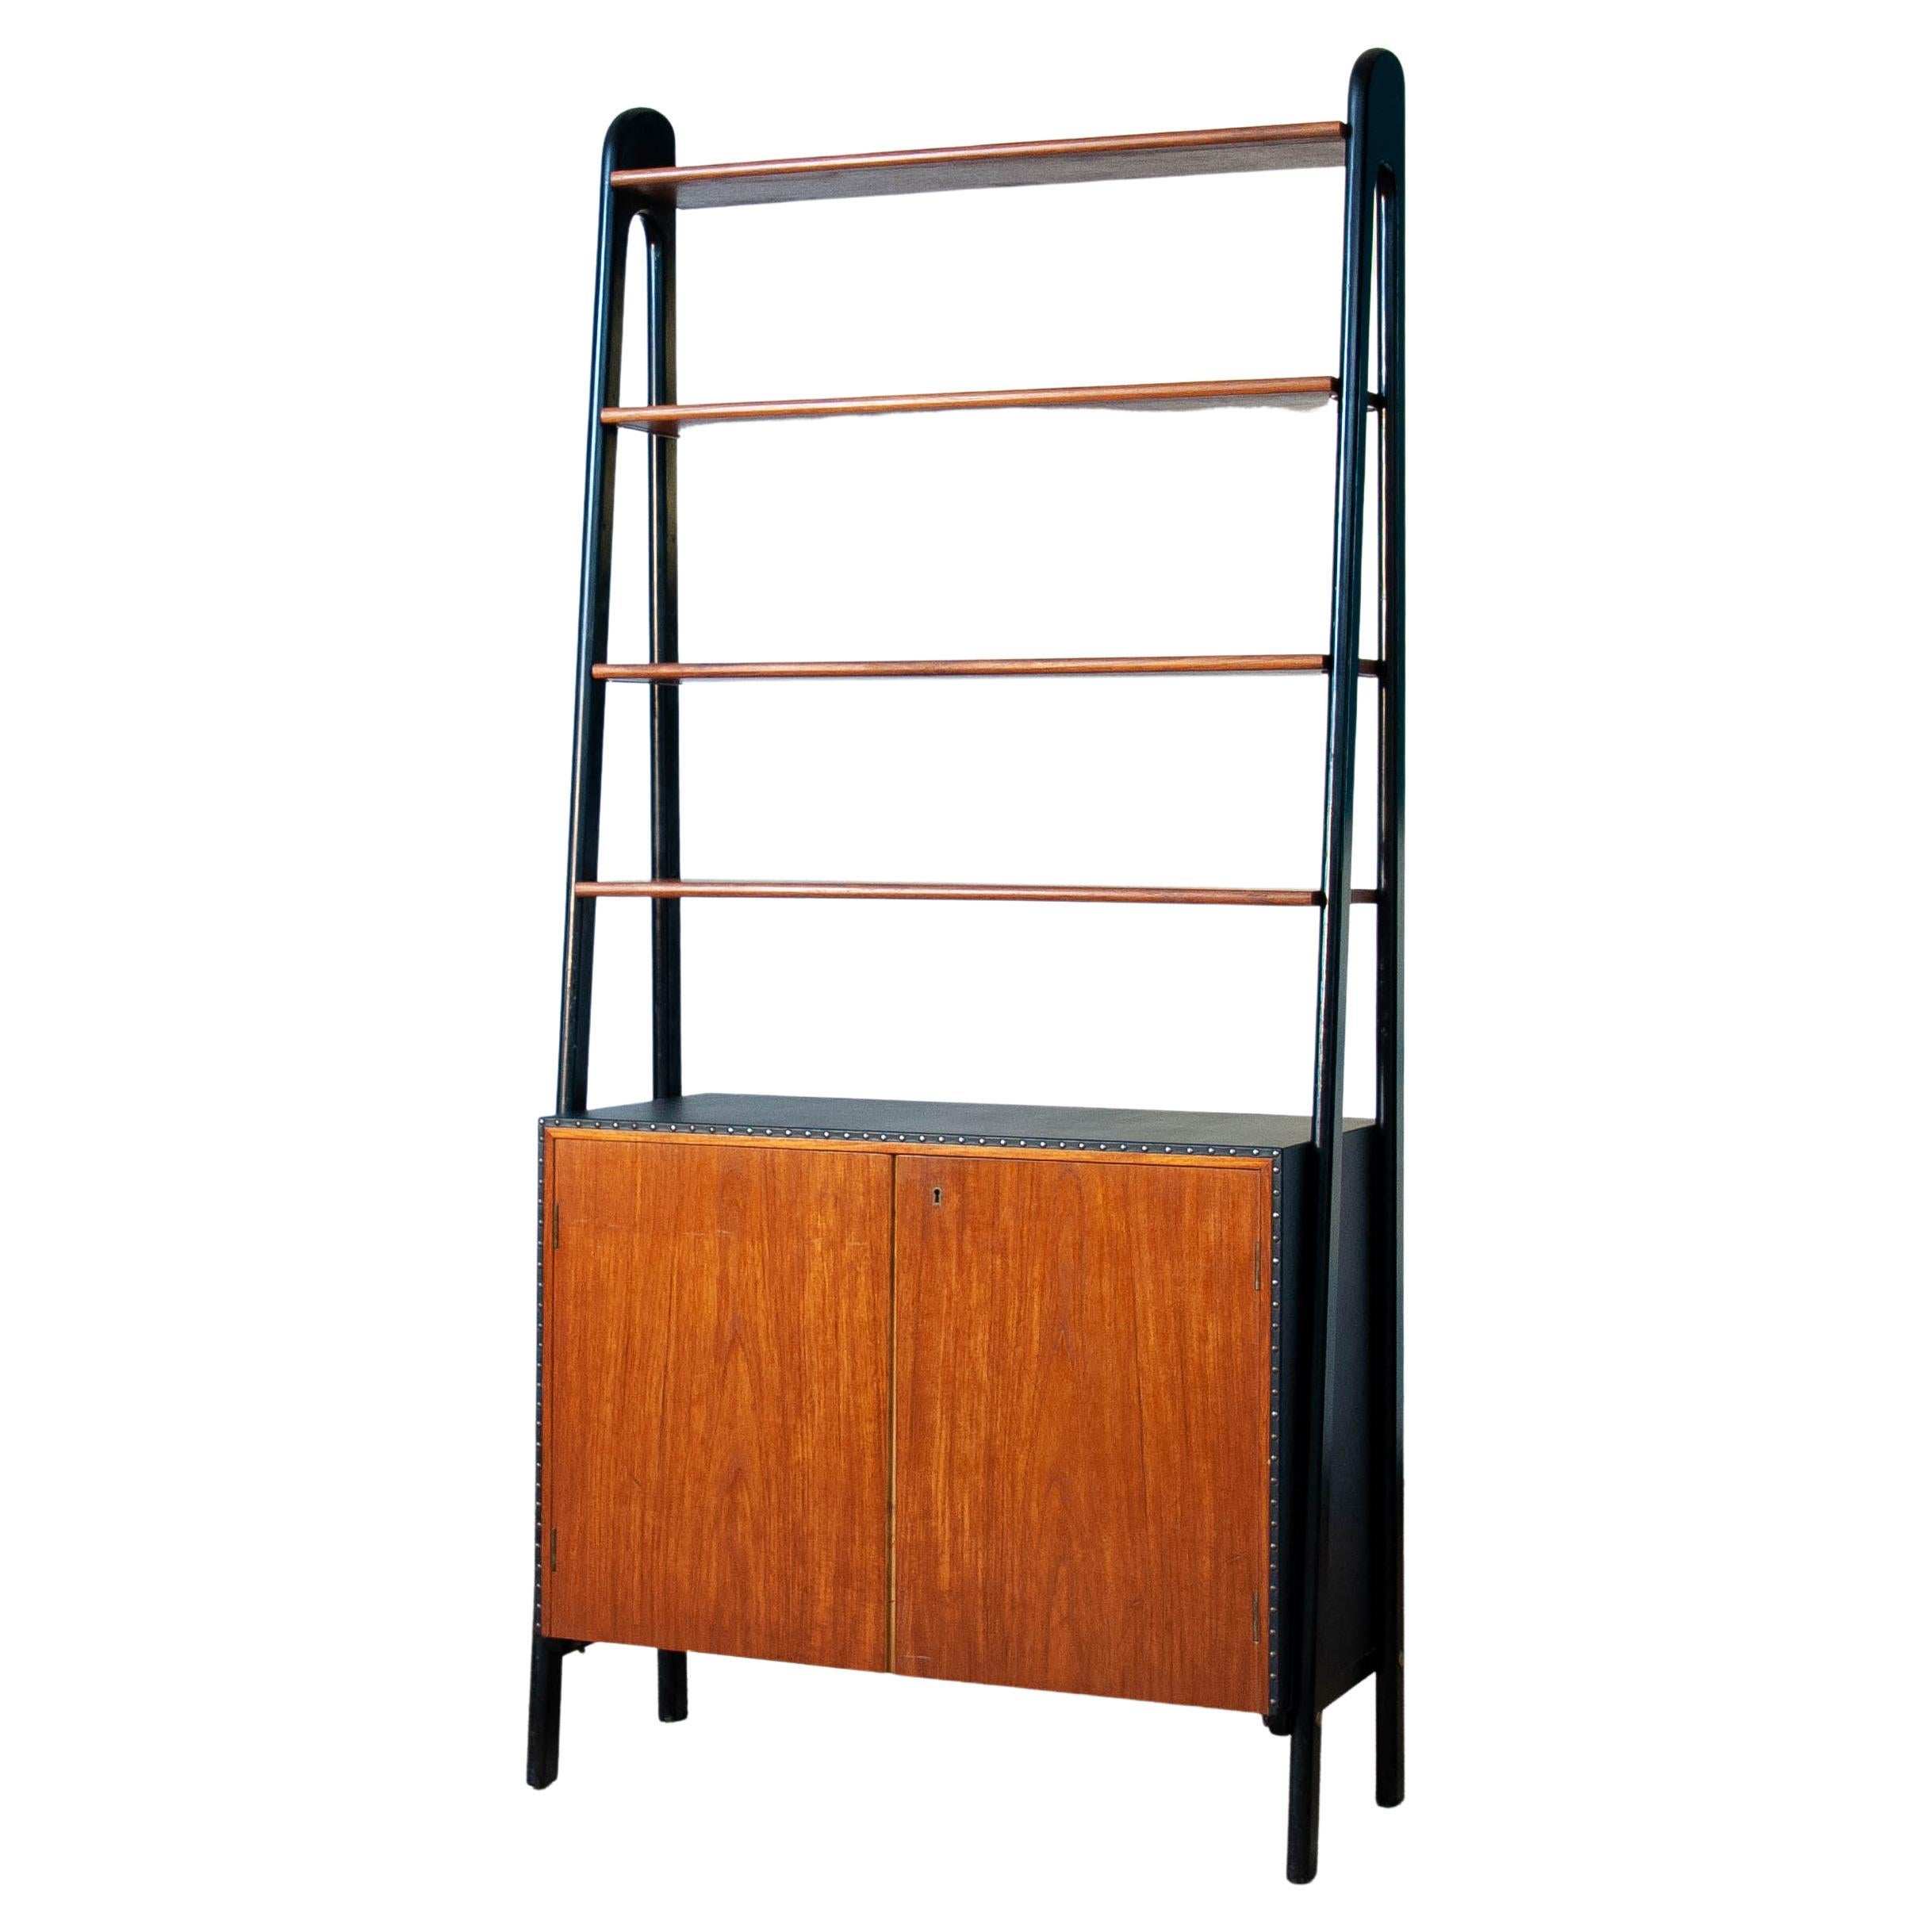 Beautiful bookcase in teak and black faux leather, nailed, and black stands. On top the cabinet has four teak veneered shelfs. The two centered shelfs are adjustable in height. All four shelfs are made to cary heavy weight.
The interior of the